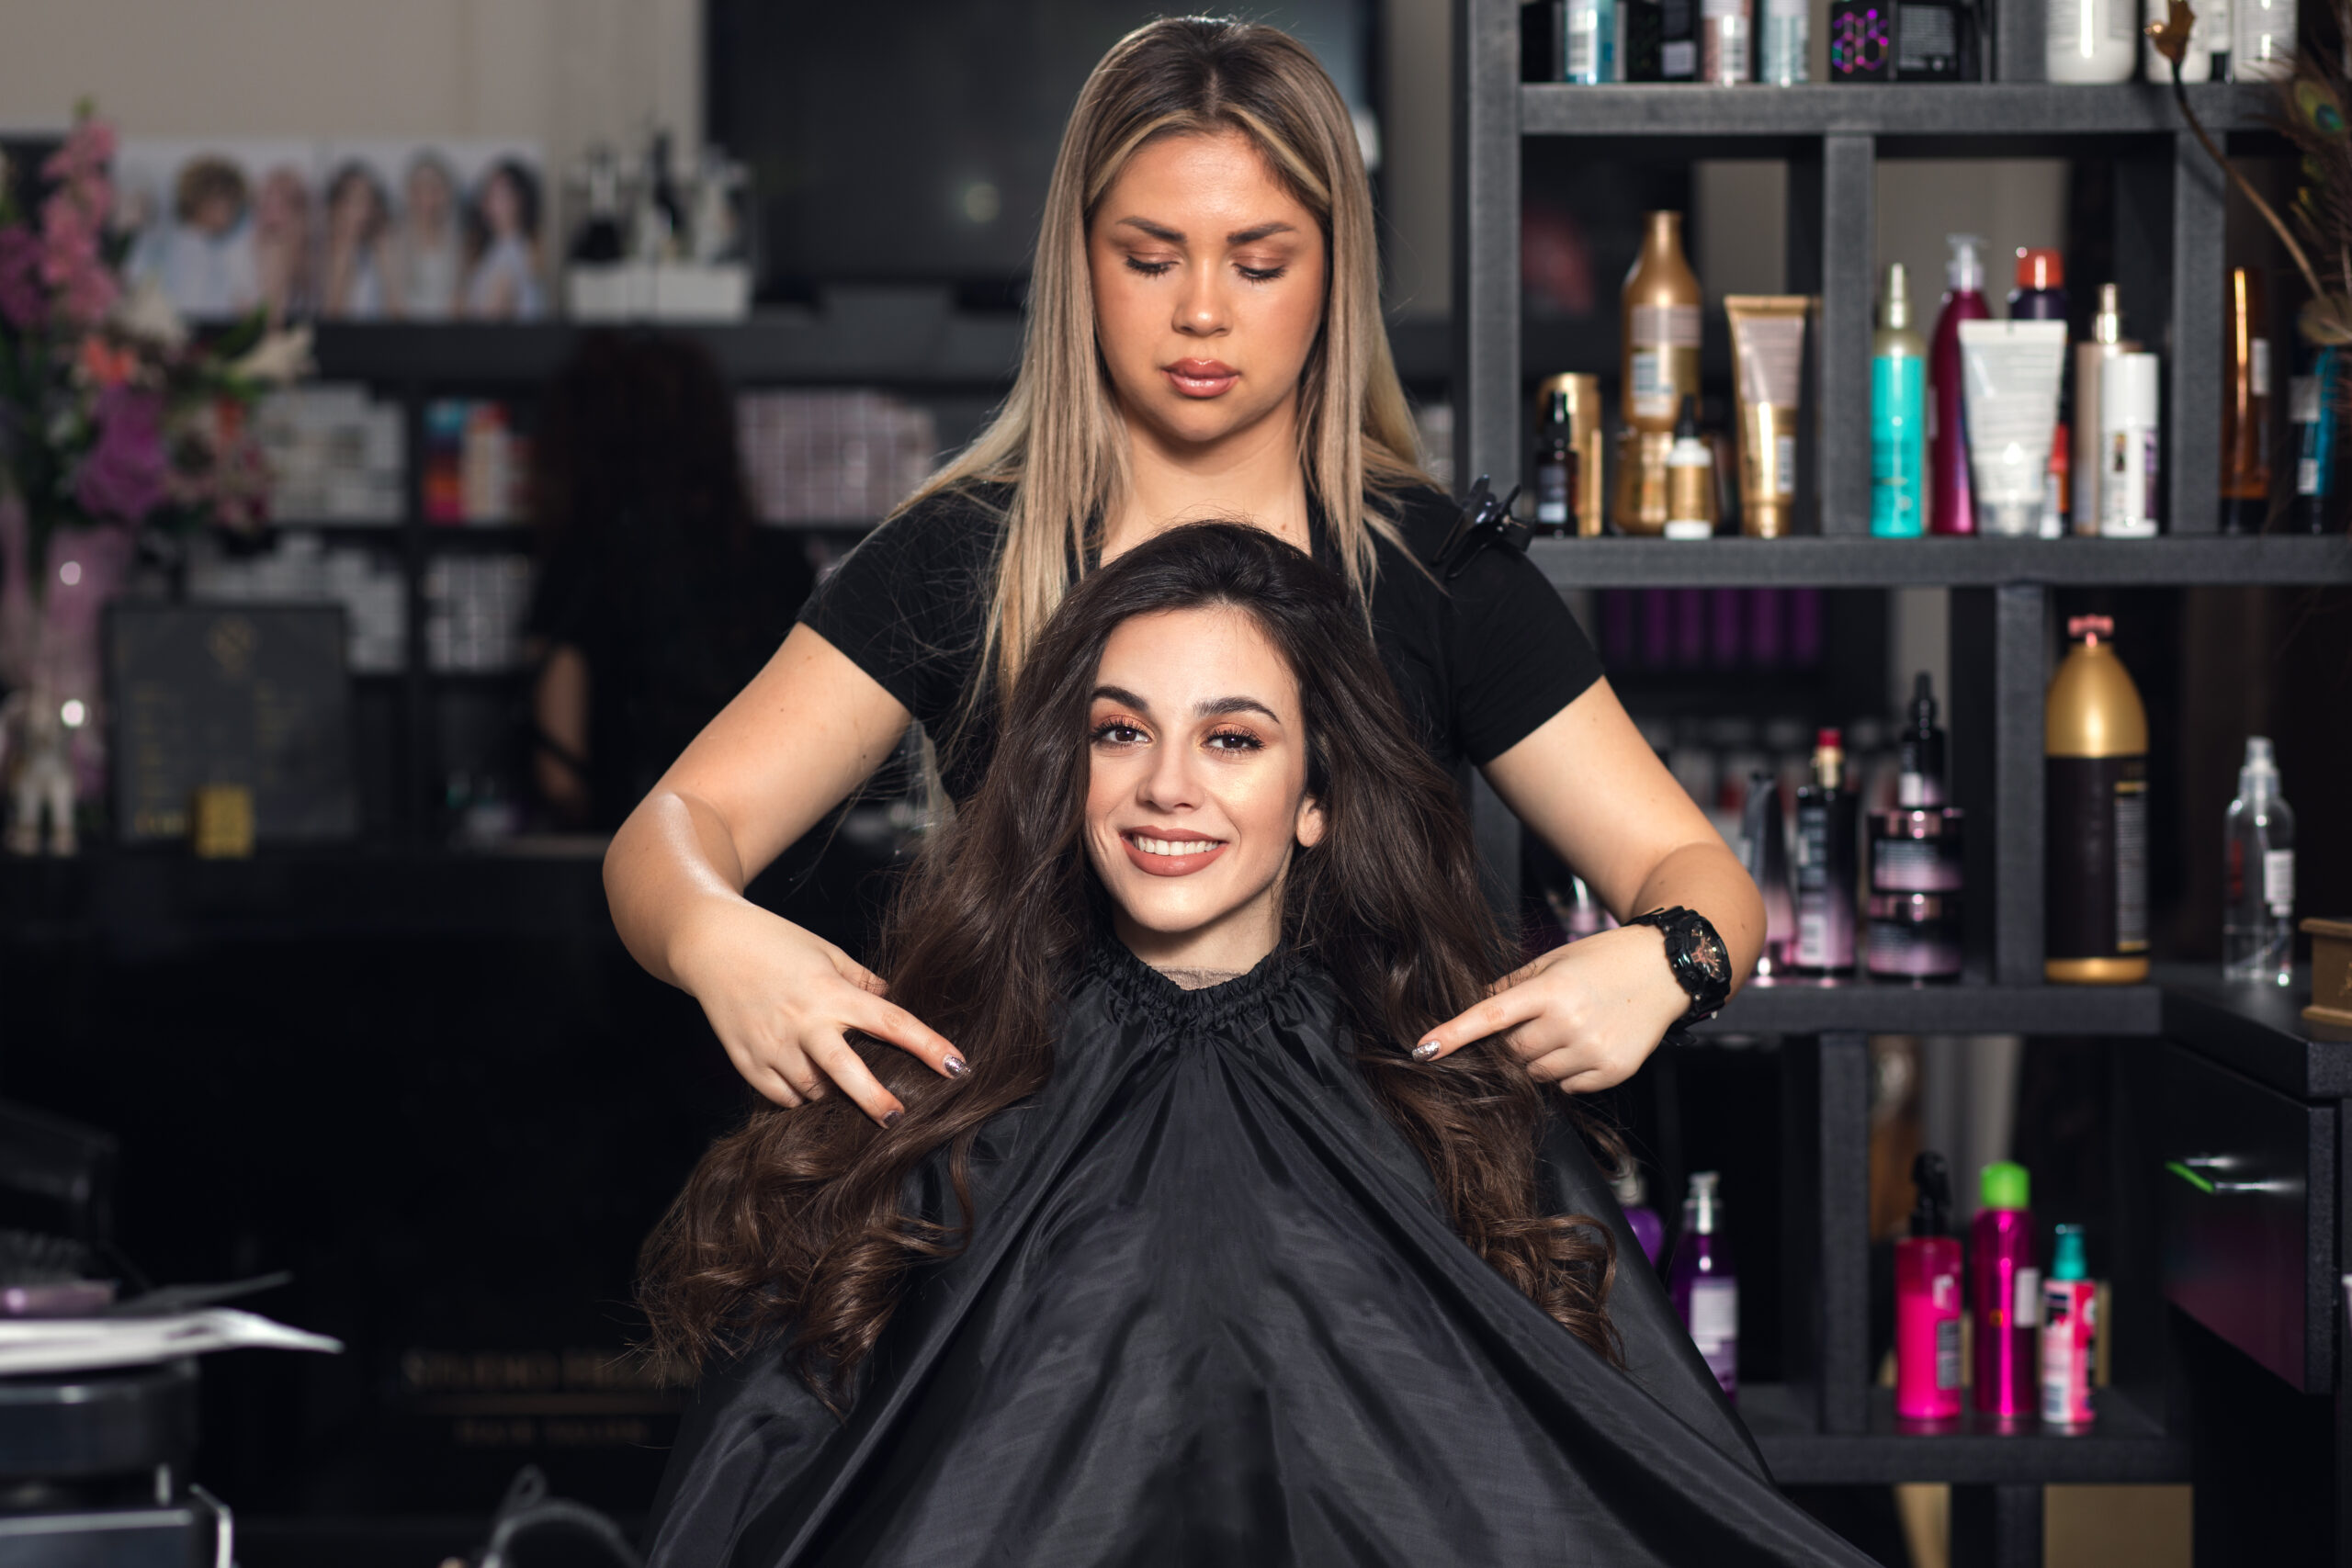 Hairdresser styling a smiling young woman's hair